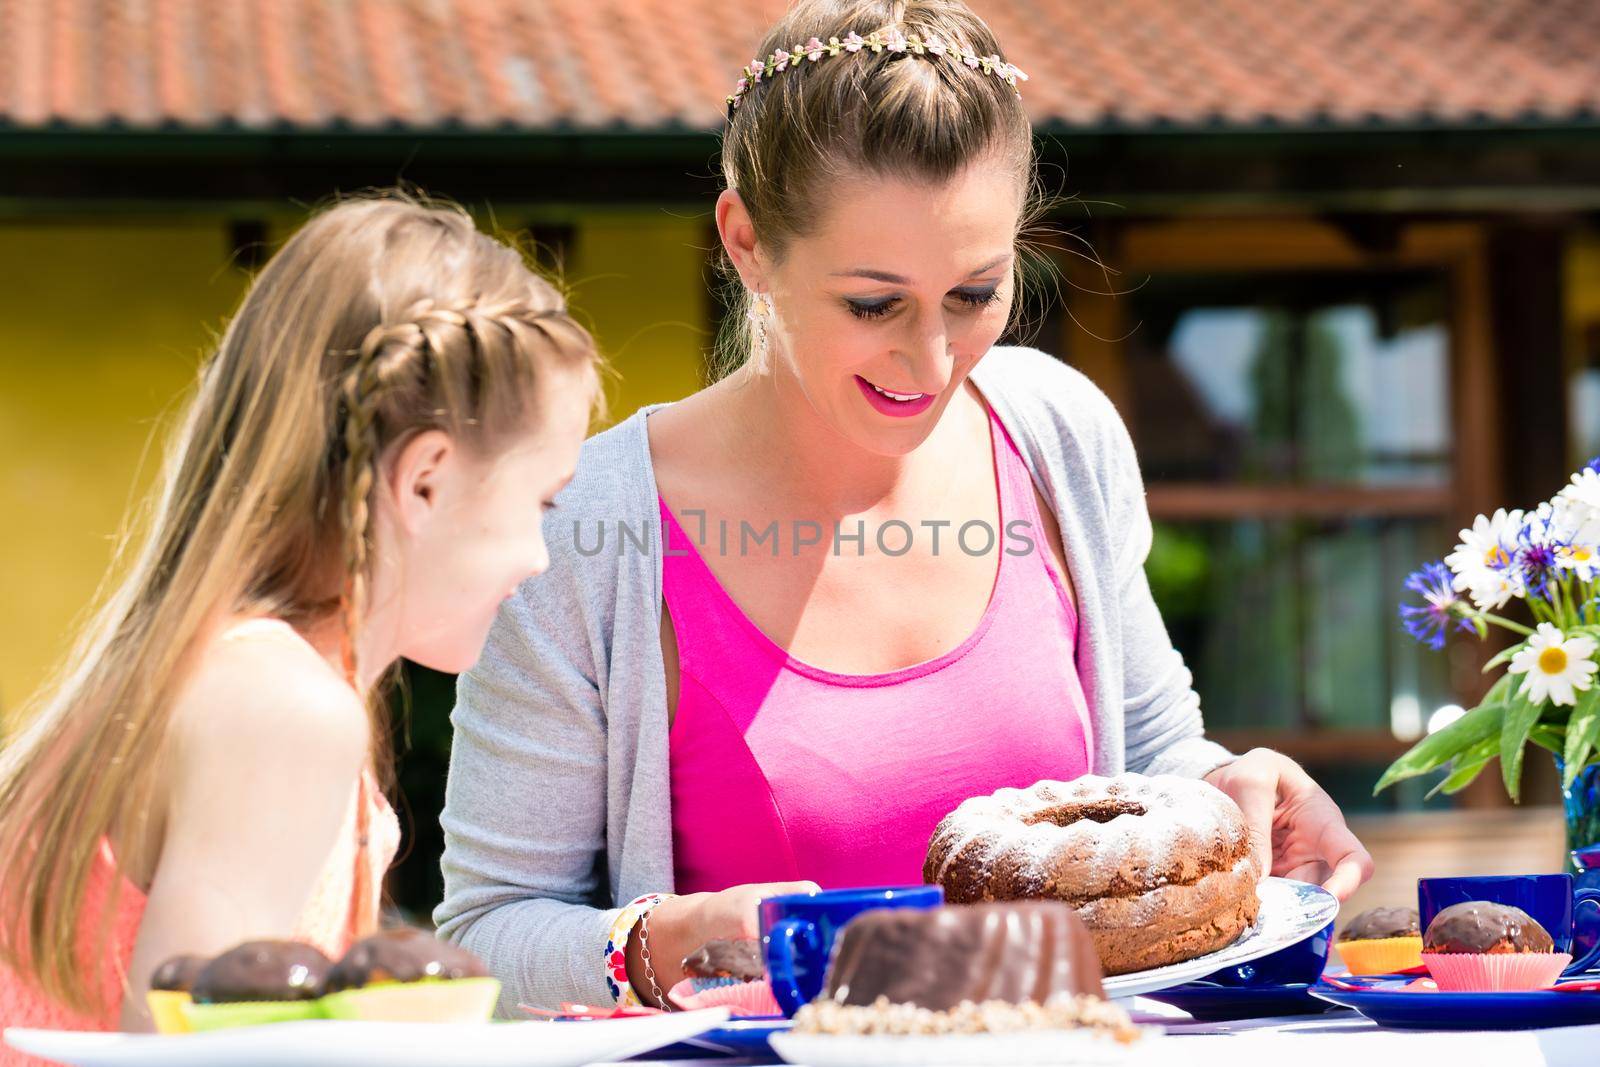 Mother cutting the cake for the family by Kzenon